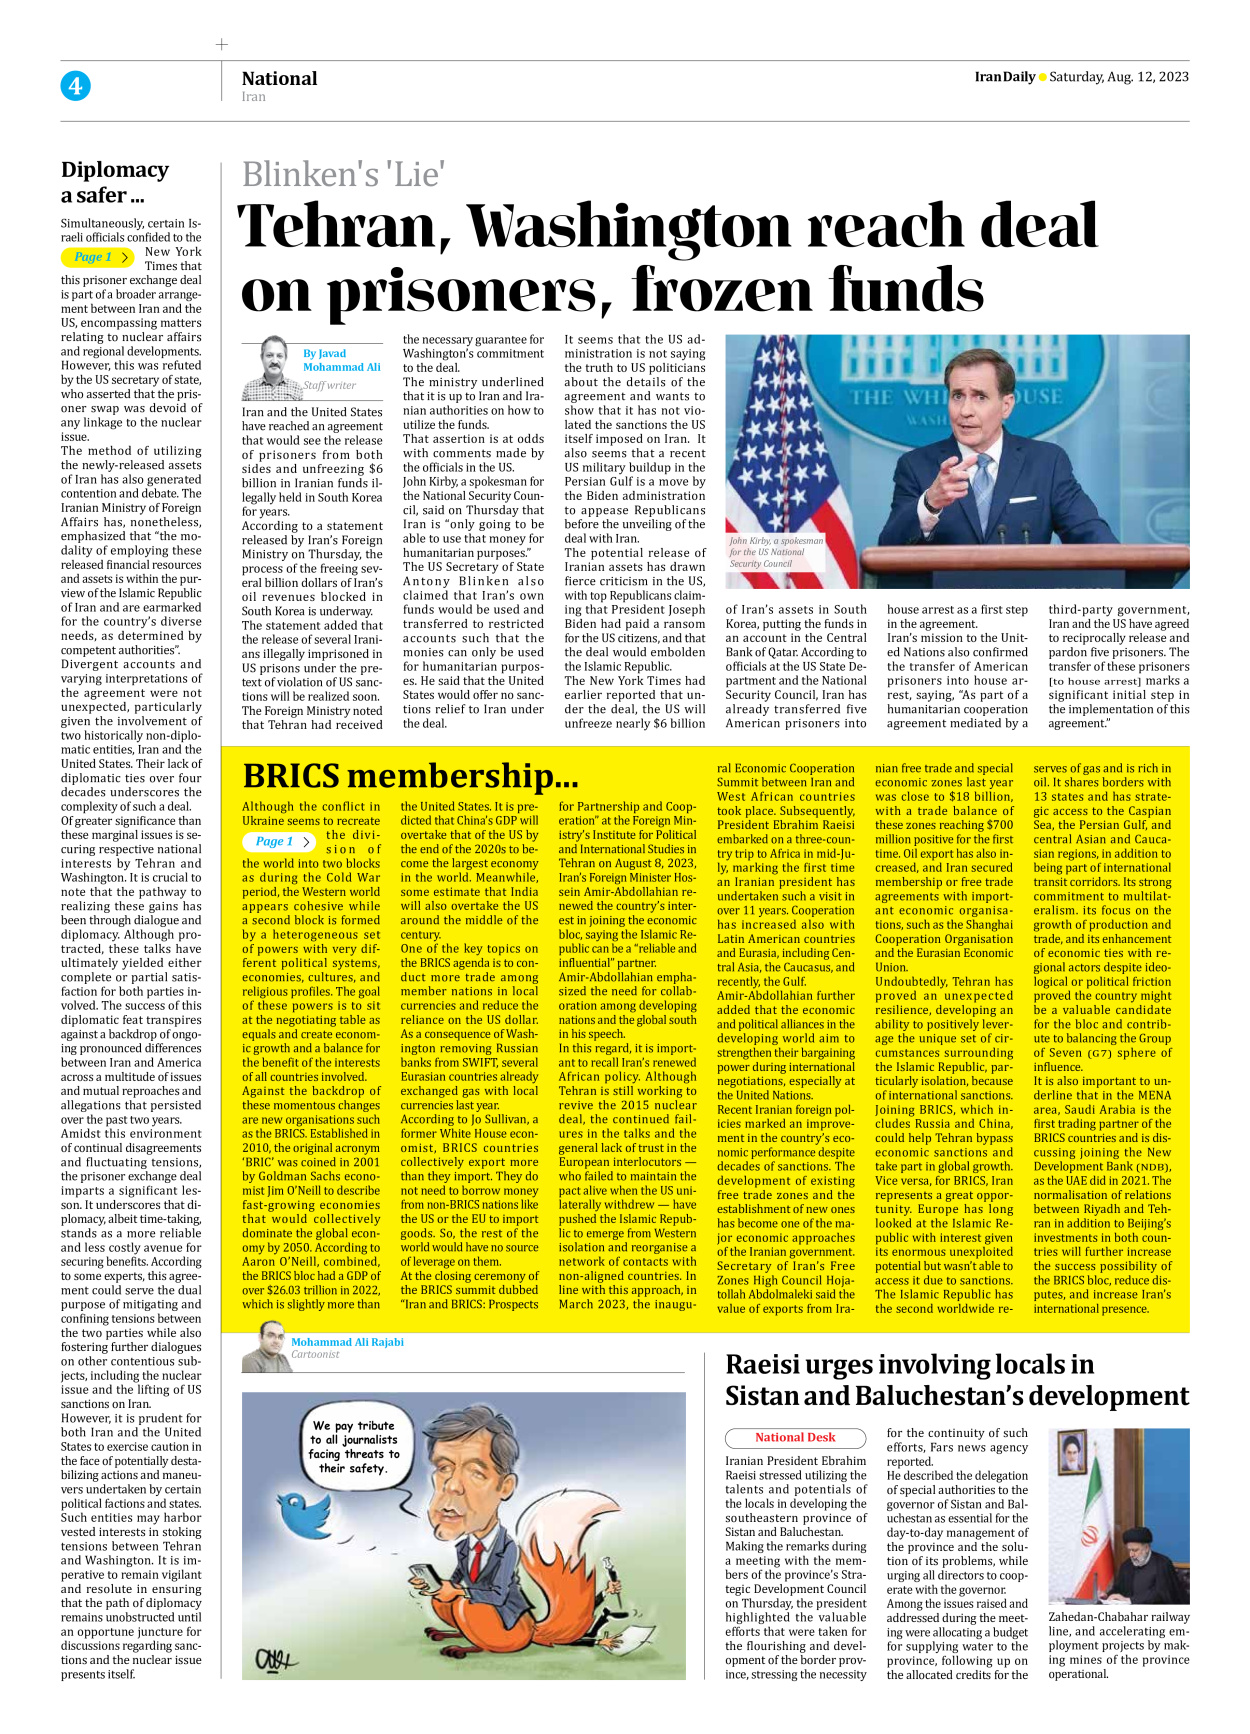 Iran Daily - Number Seven Thousand Three Hundred and Sixty - 12 August 2023 - Page 4